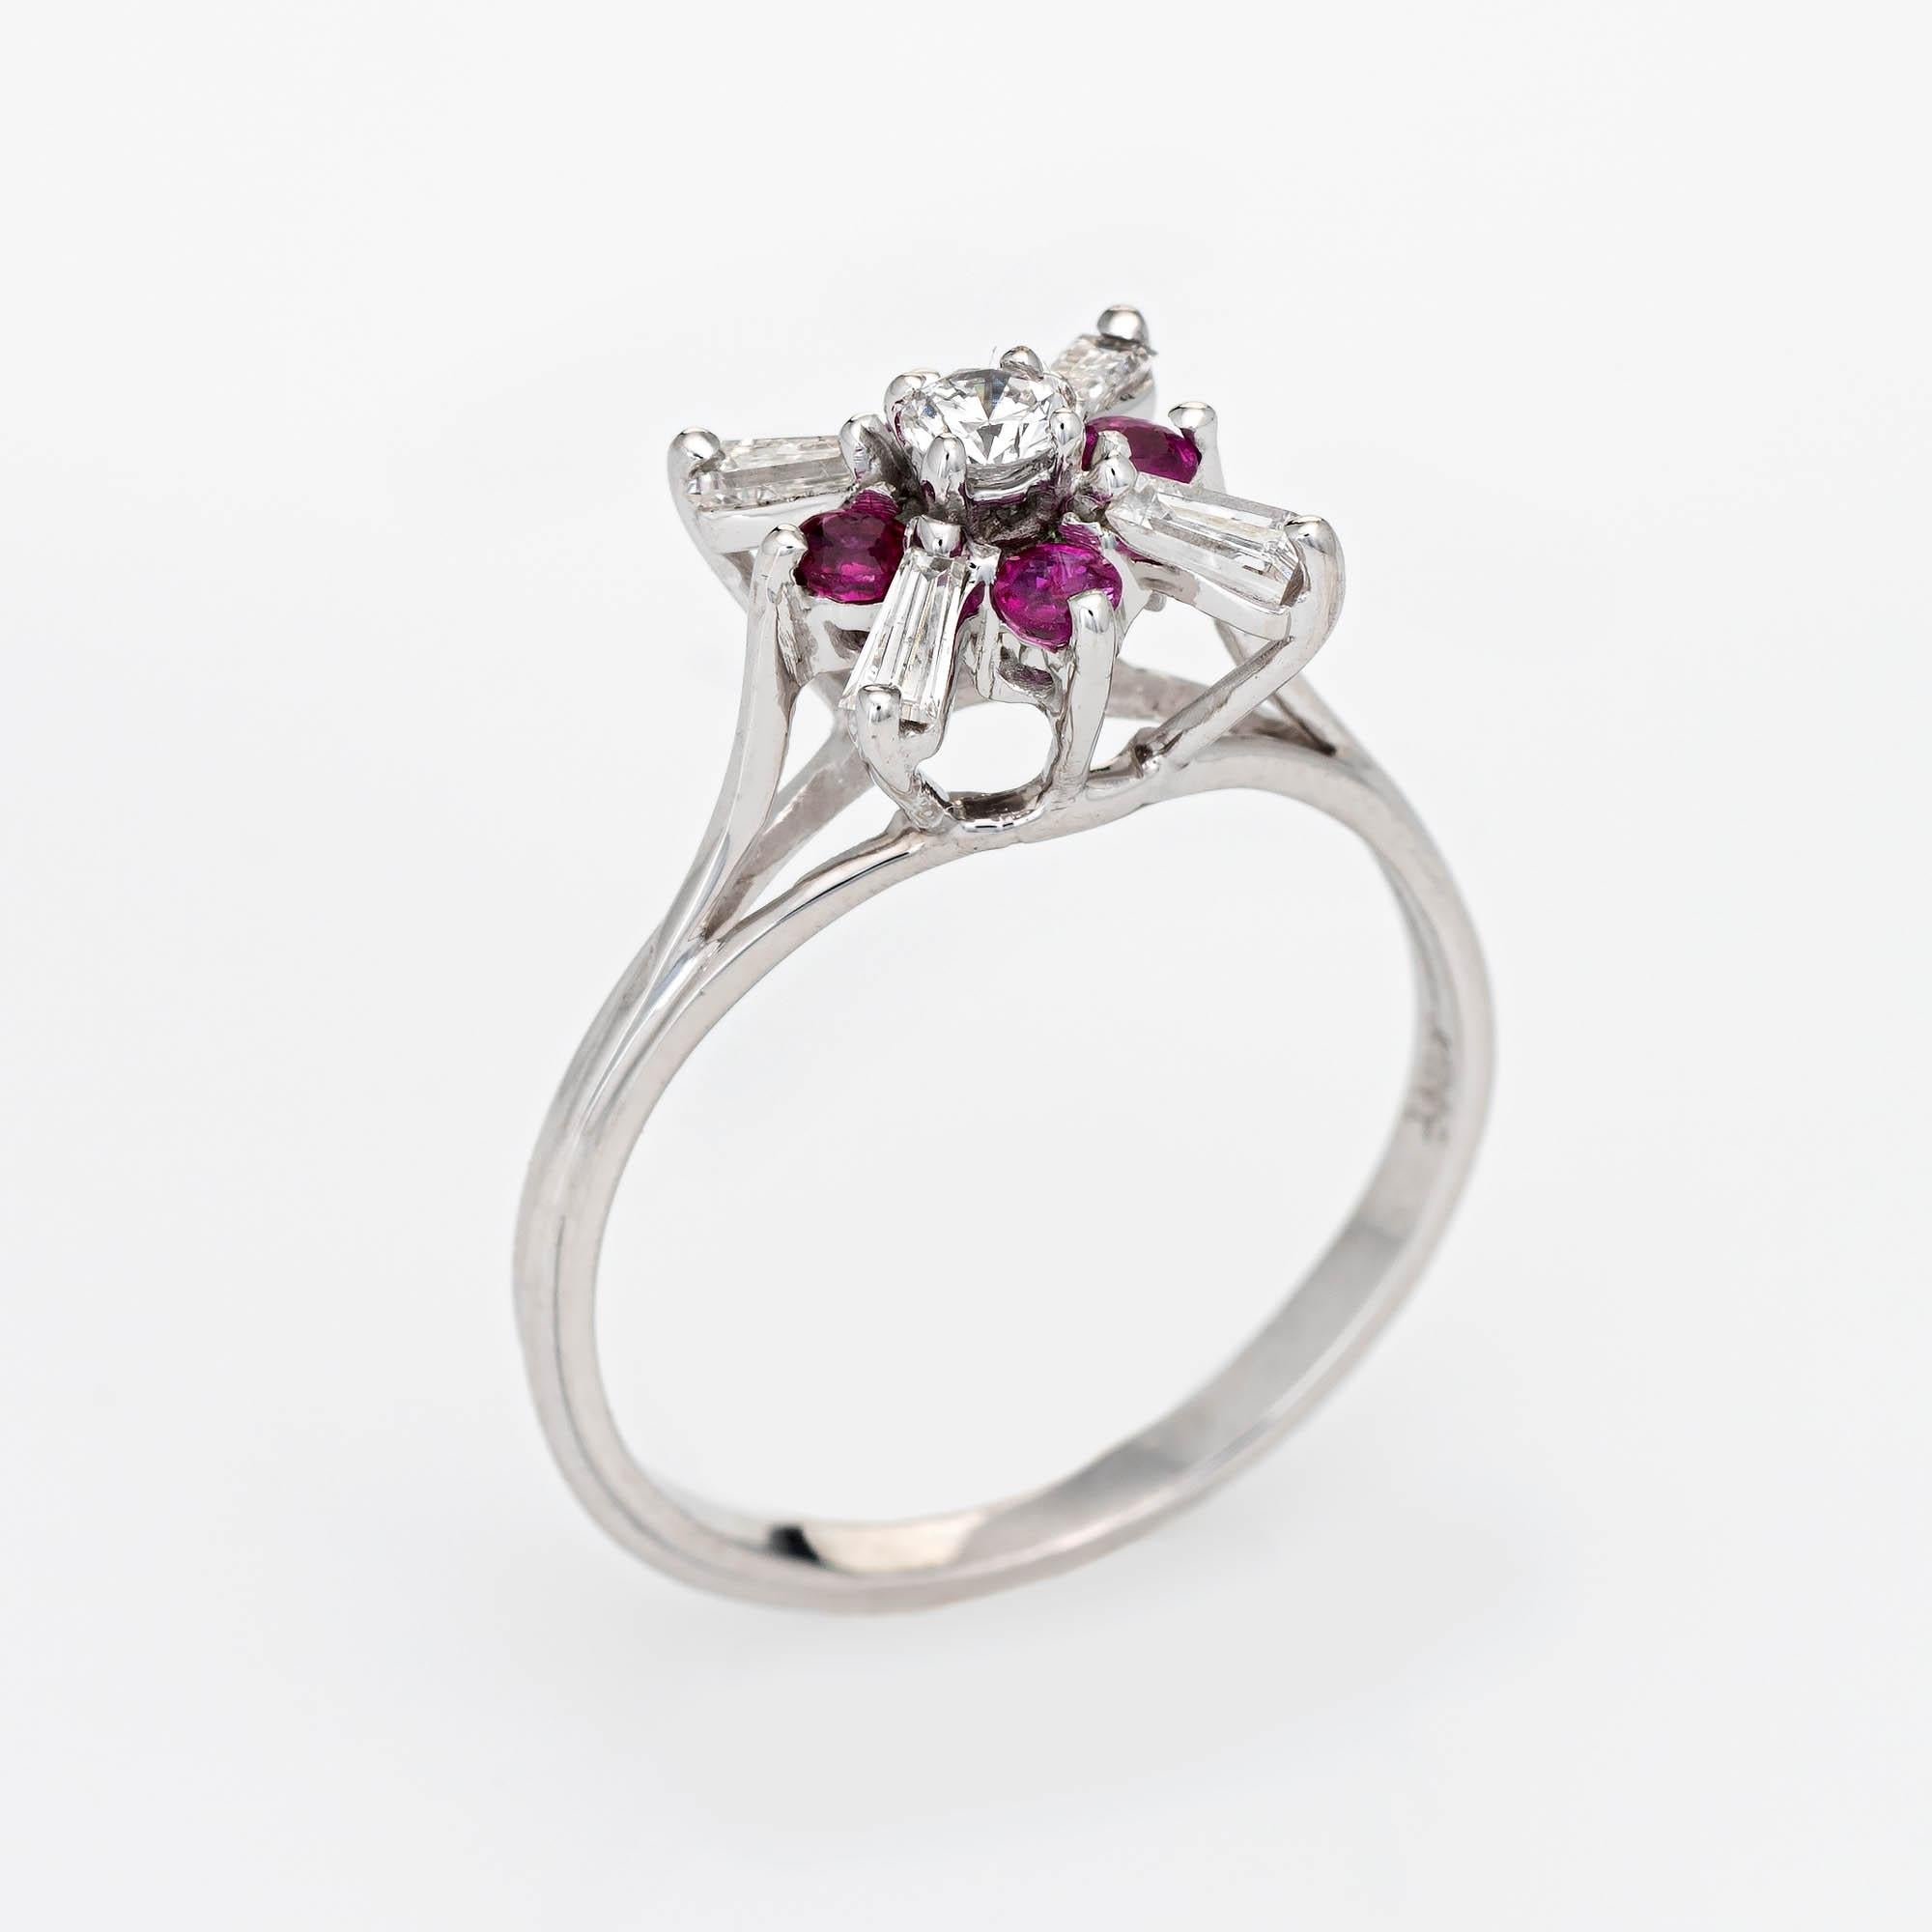 Stylish vintage diamond & ruby cocktail ring crafted in 18 karat white gold. 

Tapered baguette cut diamonds and one round brilliant cut diamond total an estimated 0.66 carats (estimated at G-H color and VS2-SI1 clarity). Four estimated 0.03 carat